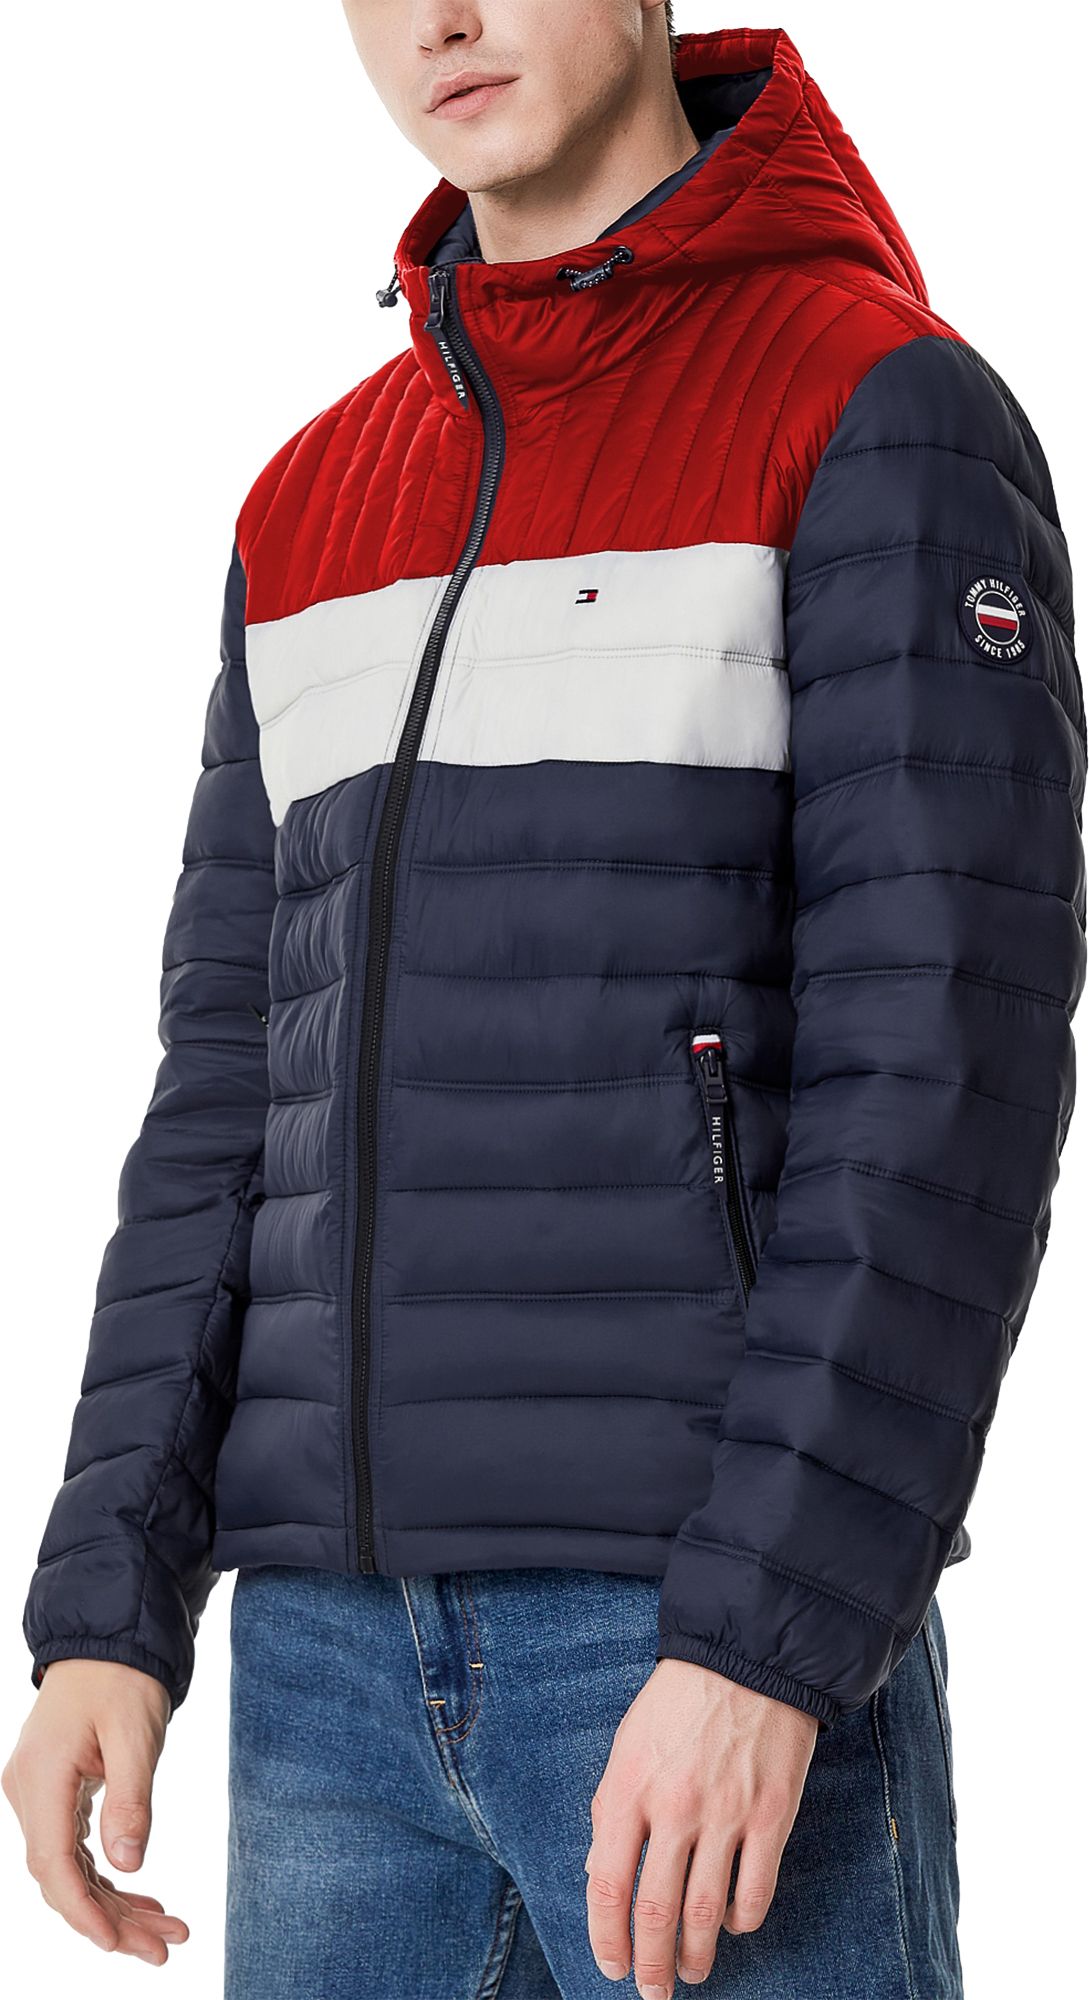 tommy snow jackets